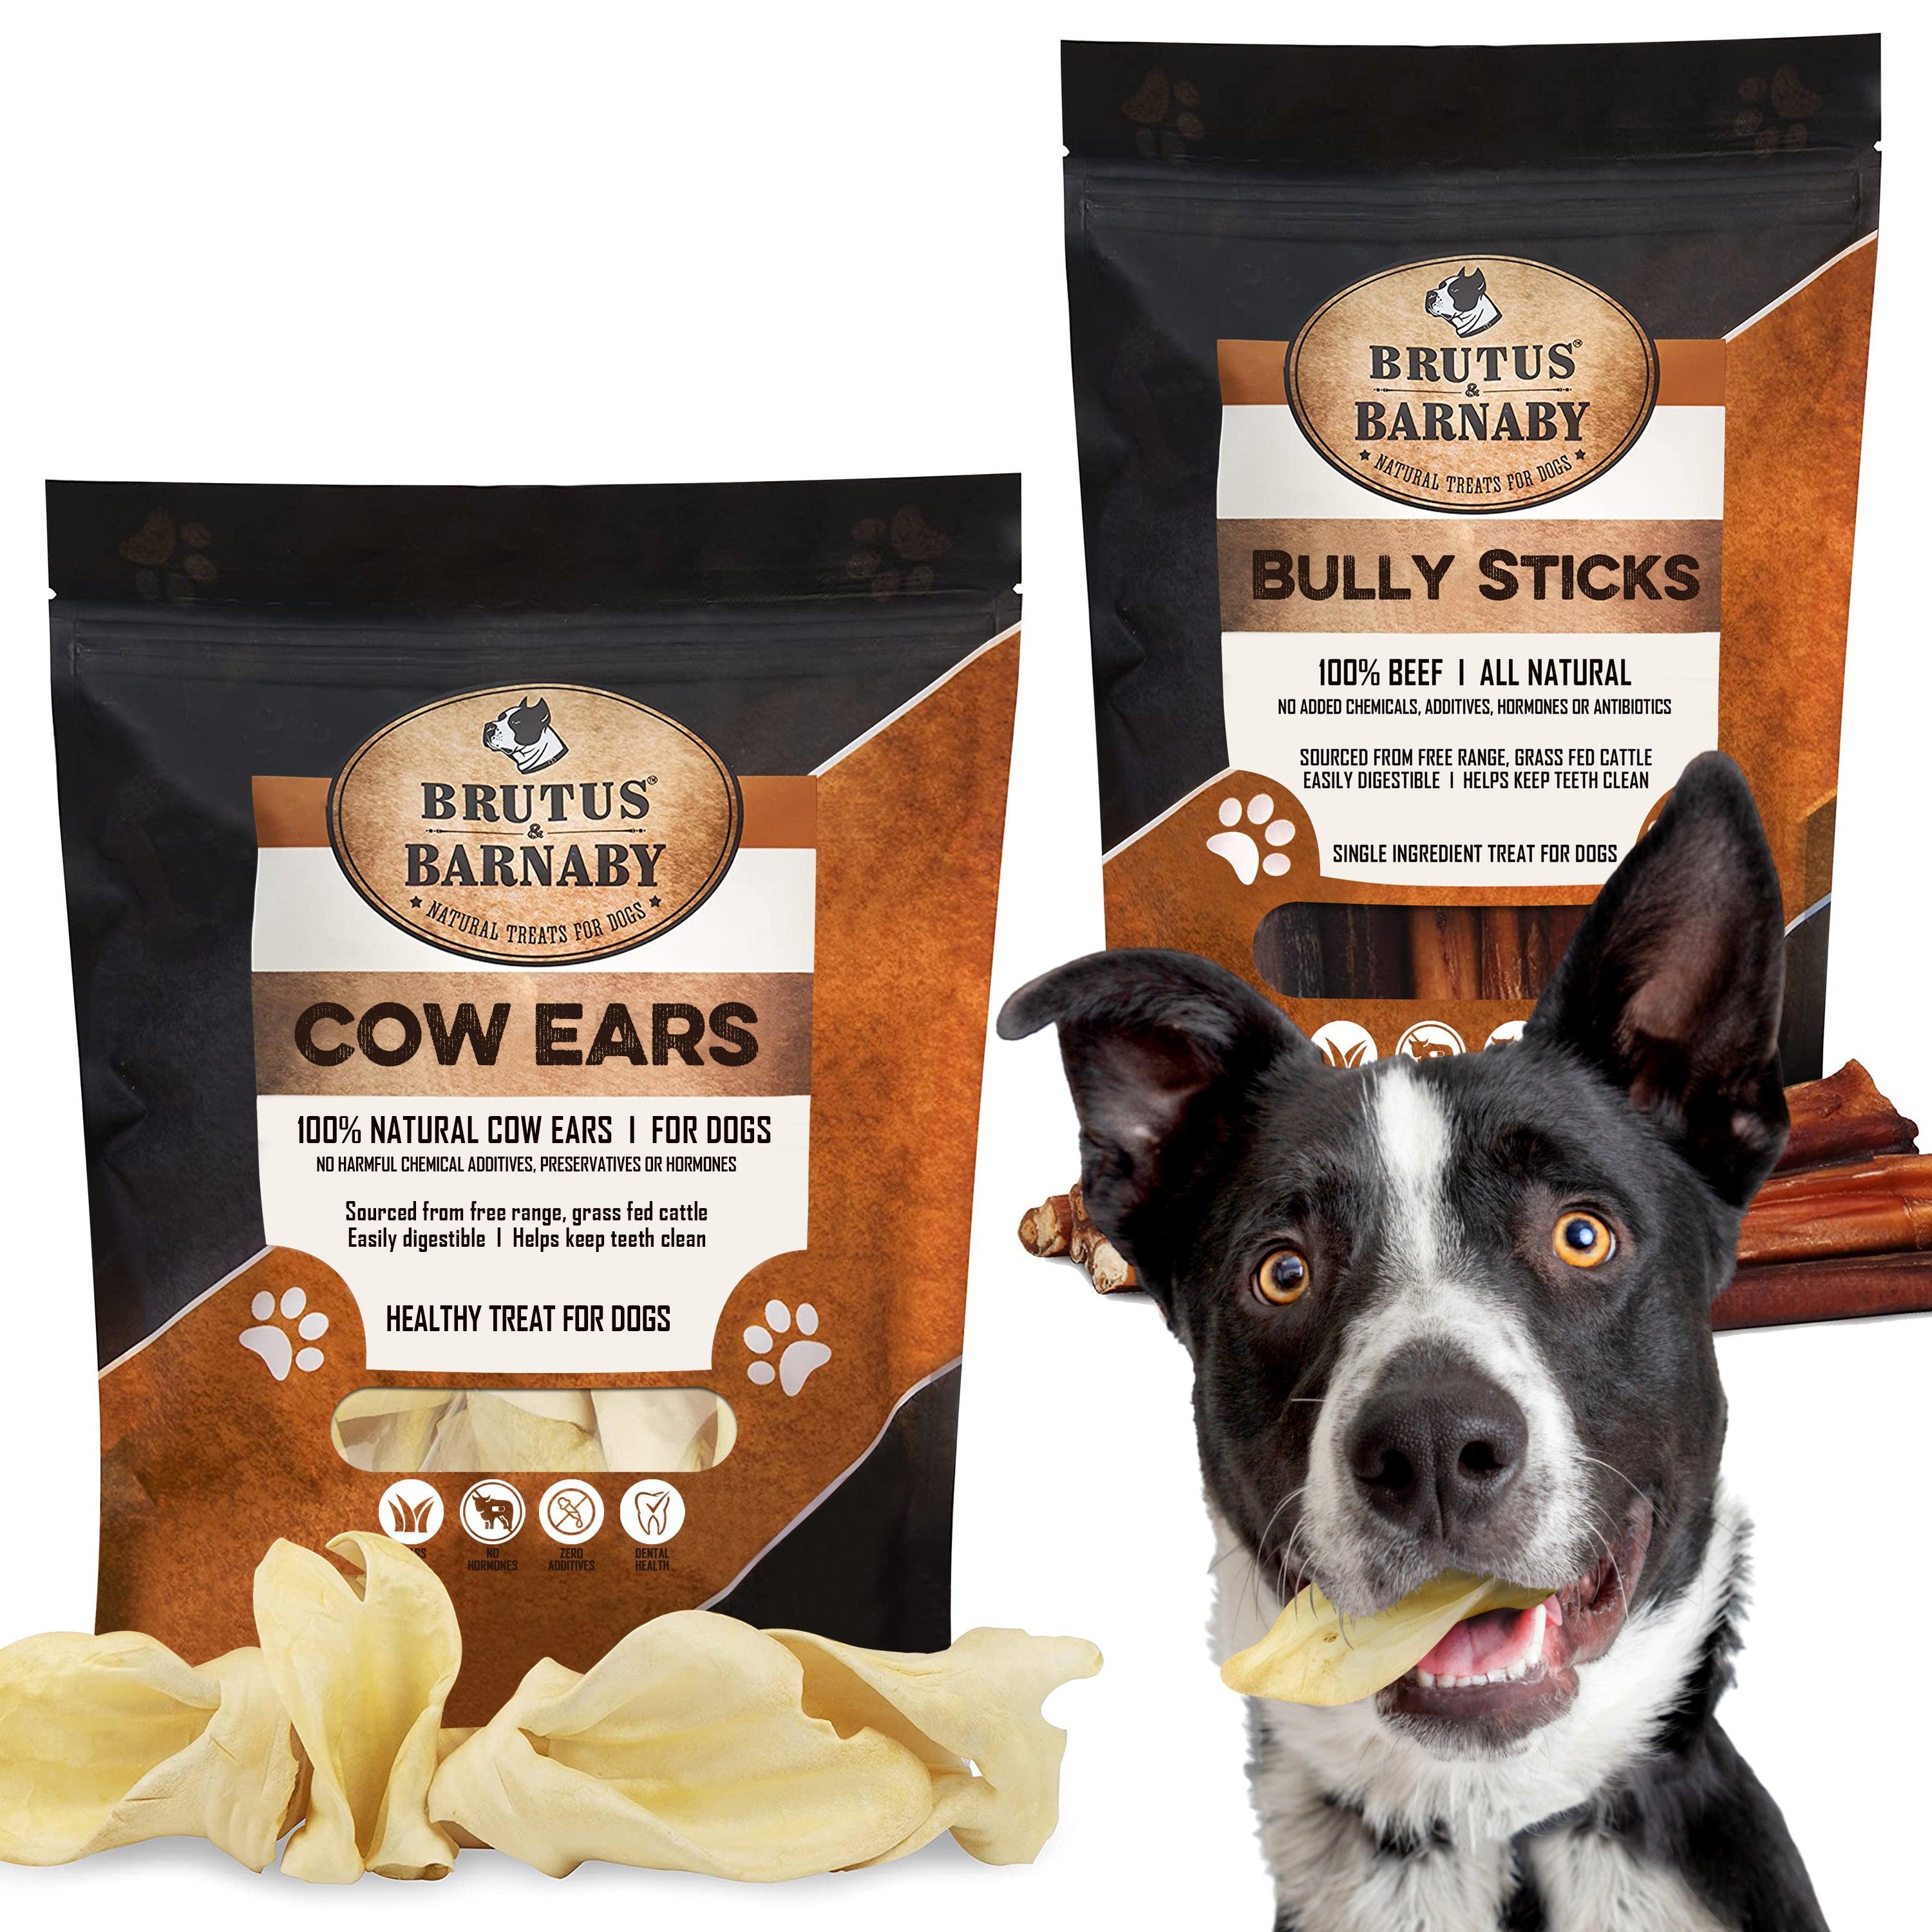 12 Cow Ears + 12 Bully Sticks, All Natural Protein Dog Treats - Brutus & Barnaby